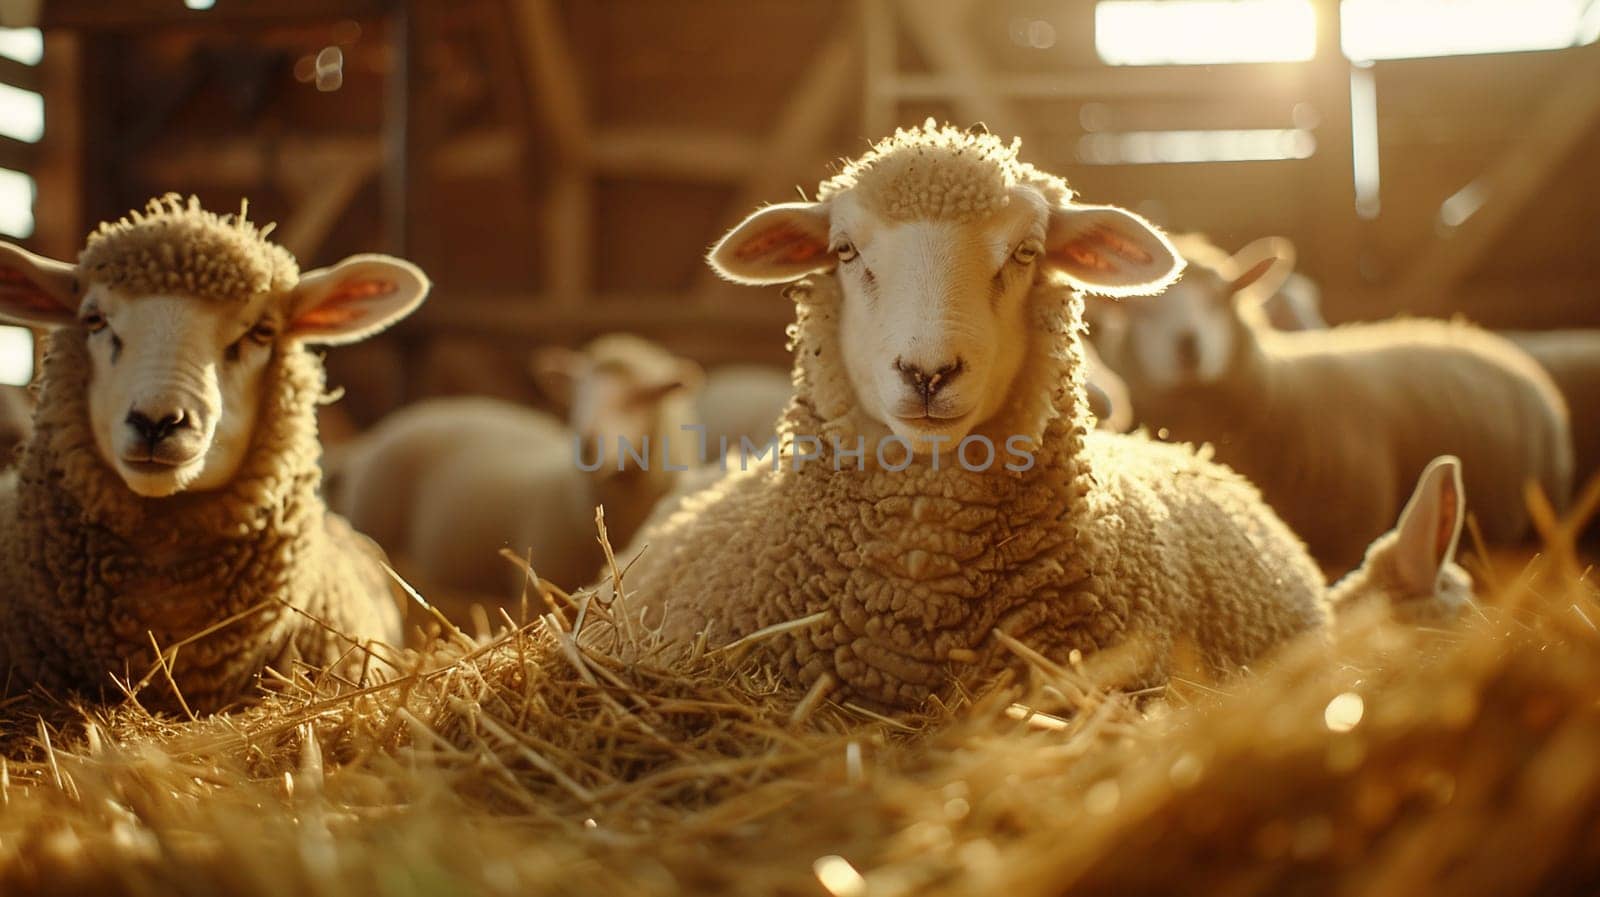 Flock of sheep, warm sunlight inside barn, peacefully resting on hay. Serene farm animals, rural setting, sense of calm and agriculture. by Yevhen89